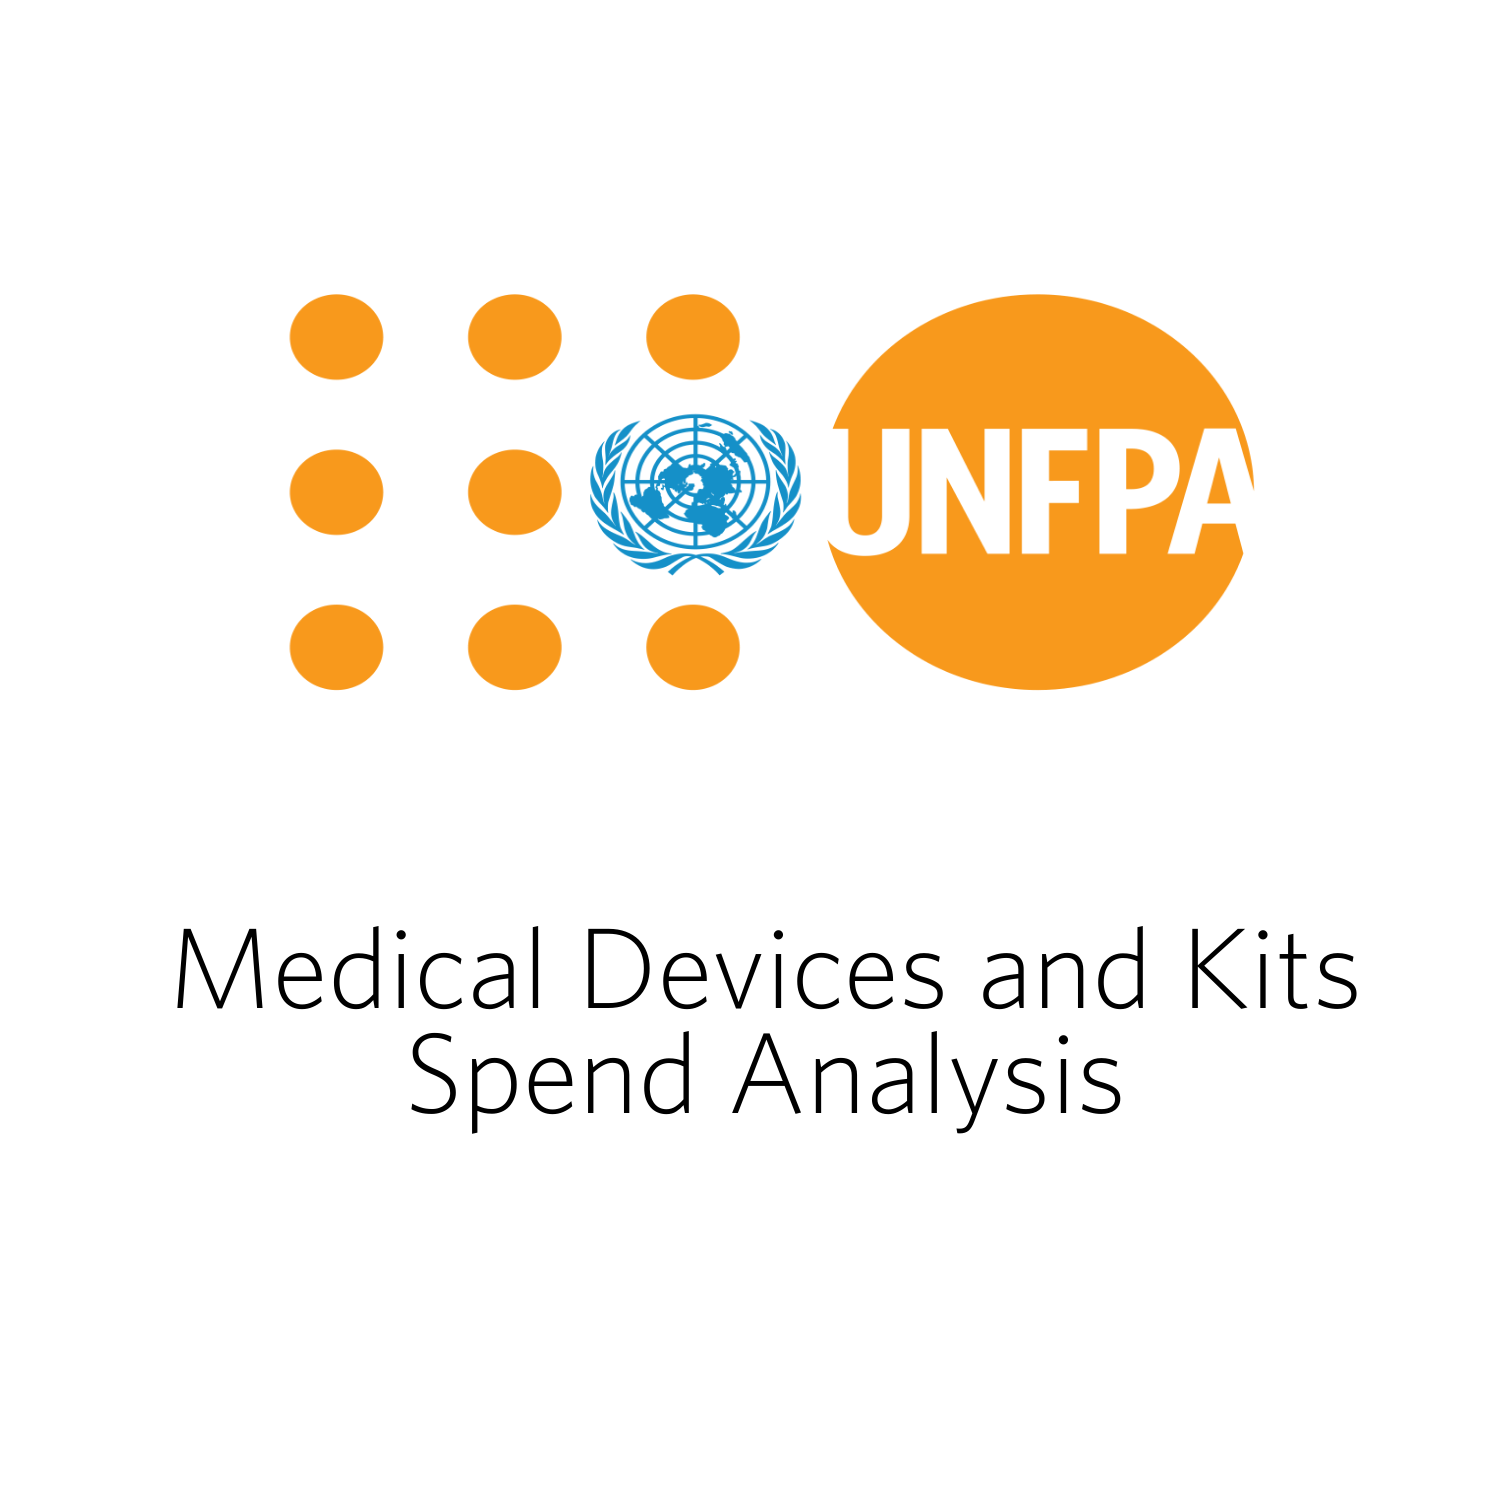 Medical Devices and Kits Spend Analysis